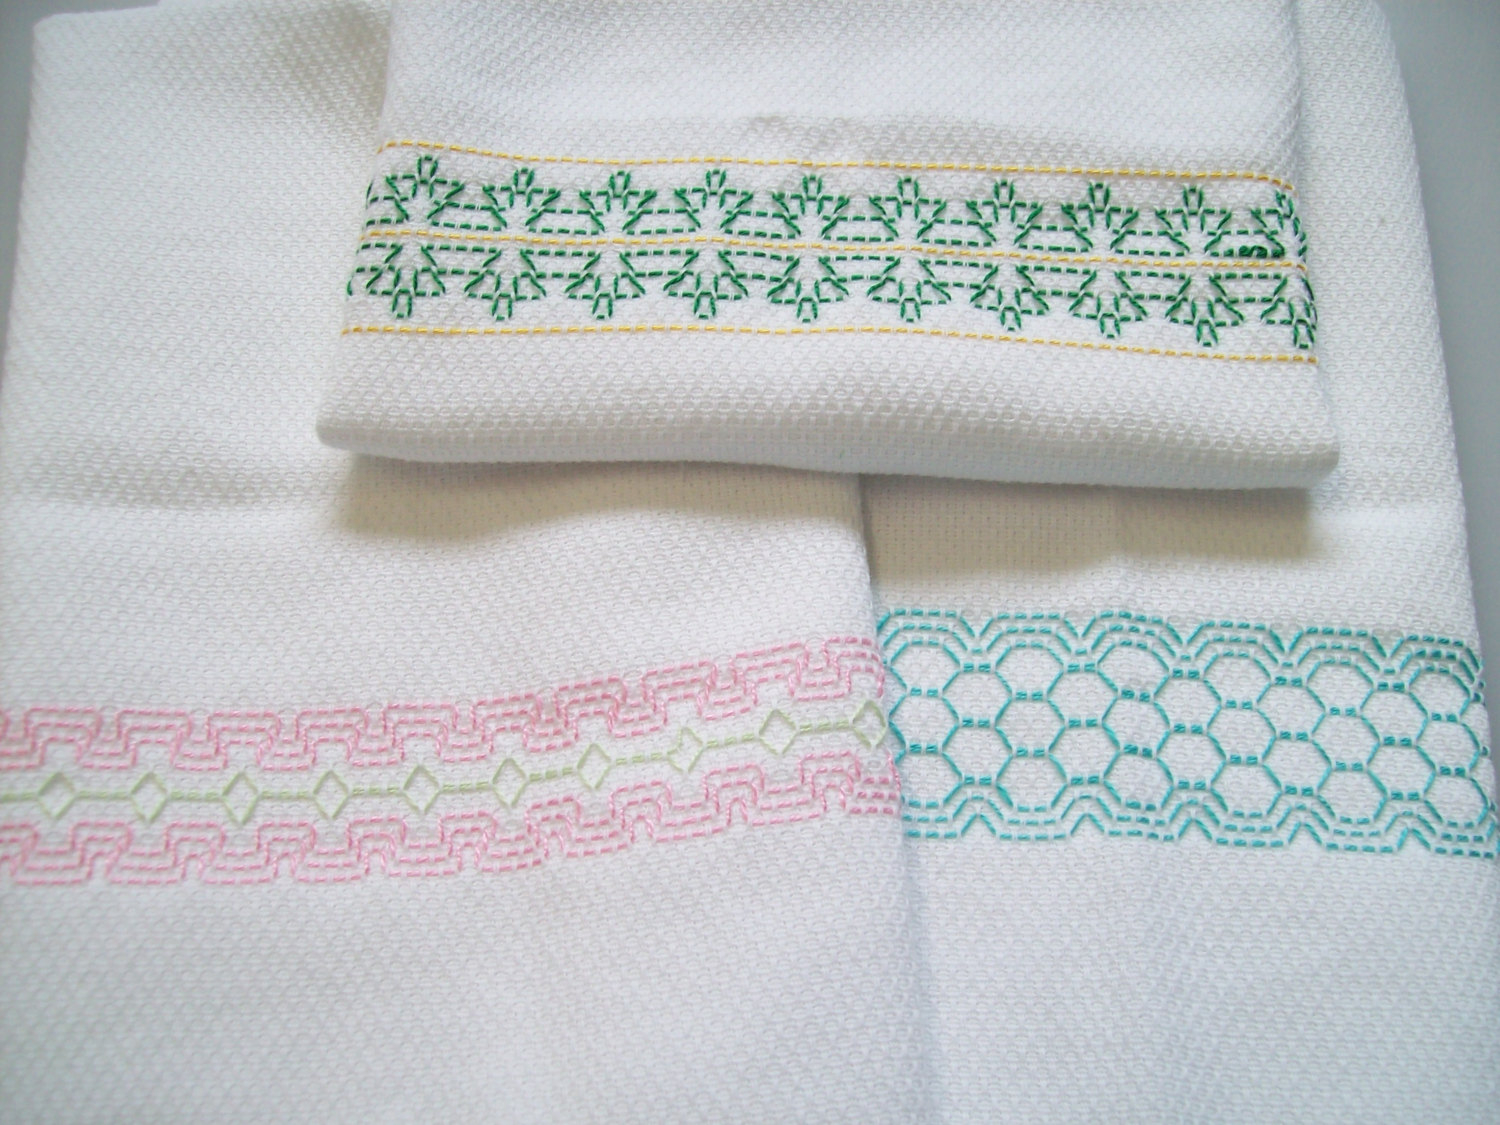 Huck Embroidery Patterns Swedish Weaving Huck Embroidery Border Pattern Set D